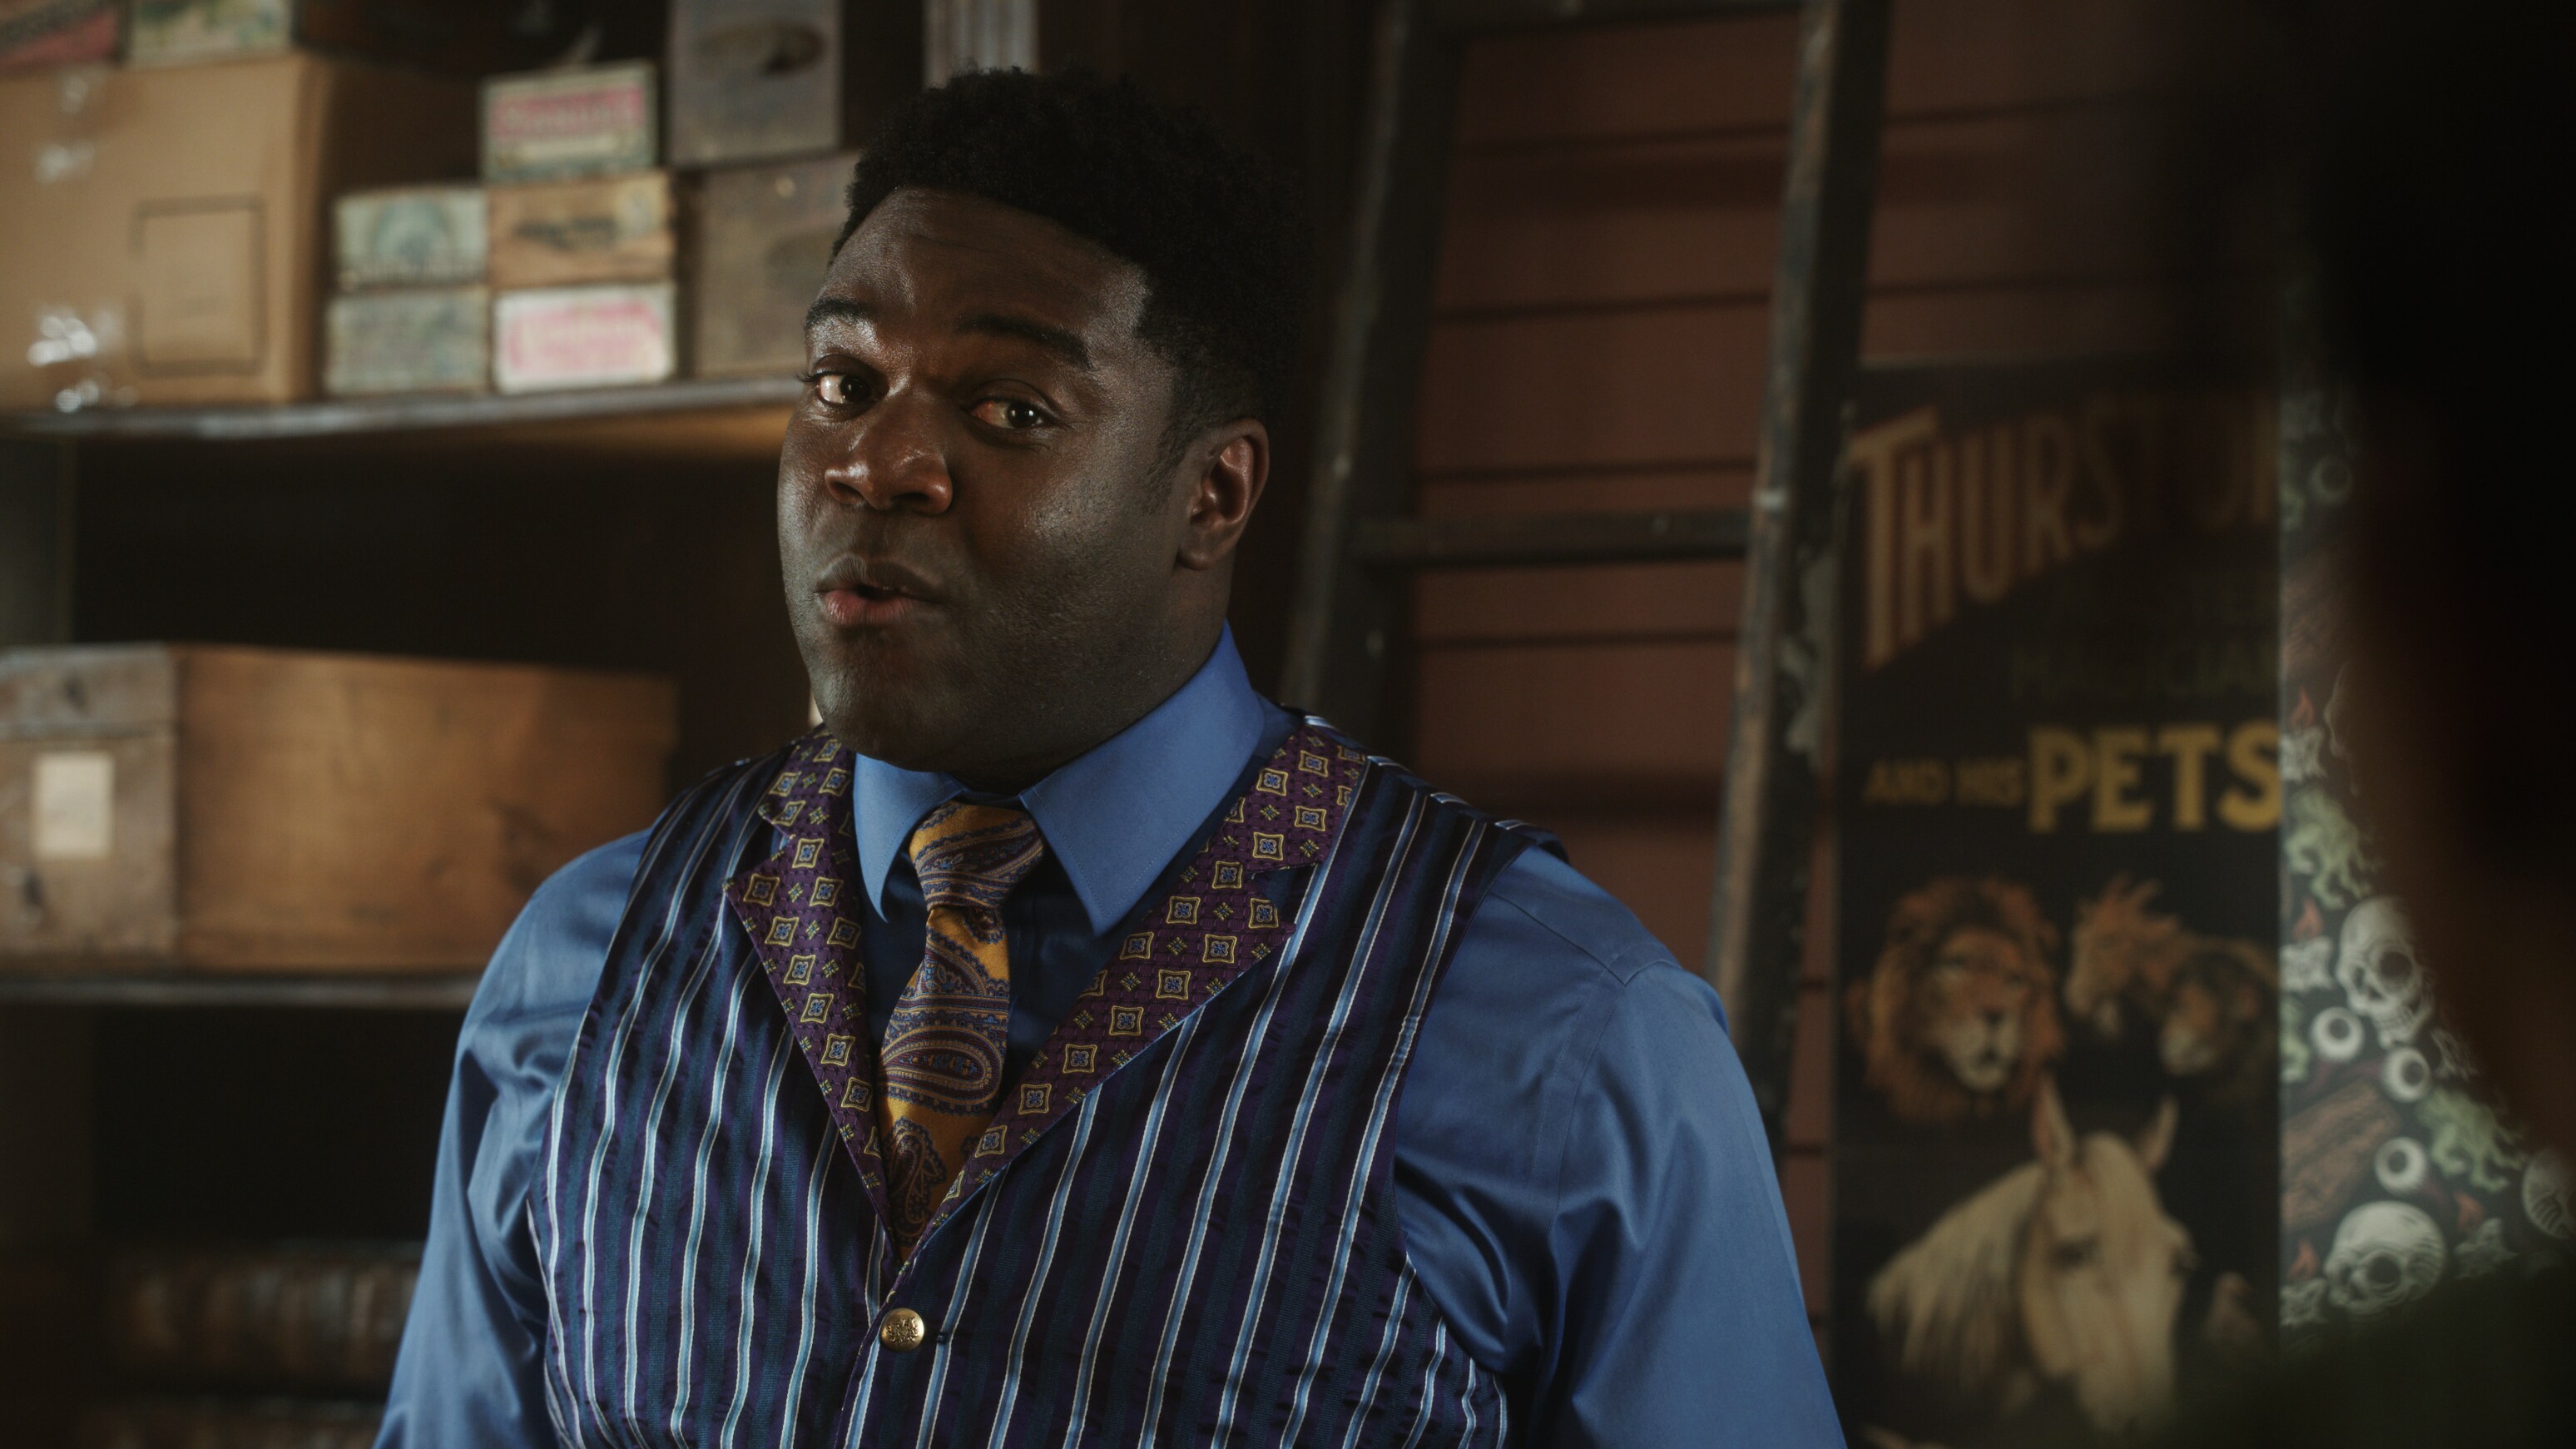 Sam Richardson as Gilbert in Disney's live-action HOCUS POCUS 2, exclusively on Disney+. Photo courtesy of Disney Enterprises, Inc. © 2022 Disney Enterprises, Inc. All Rights Reserved.